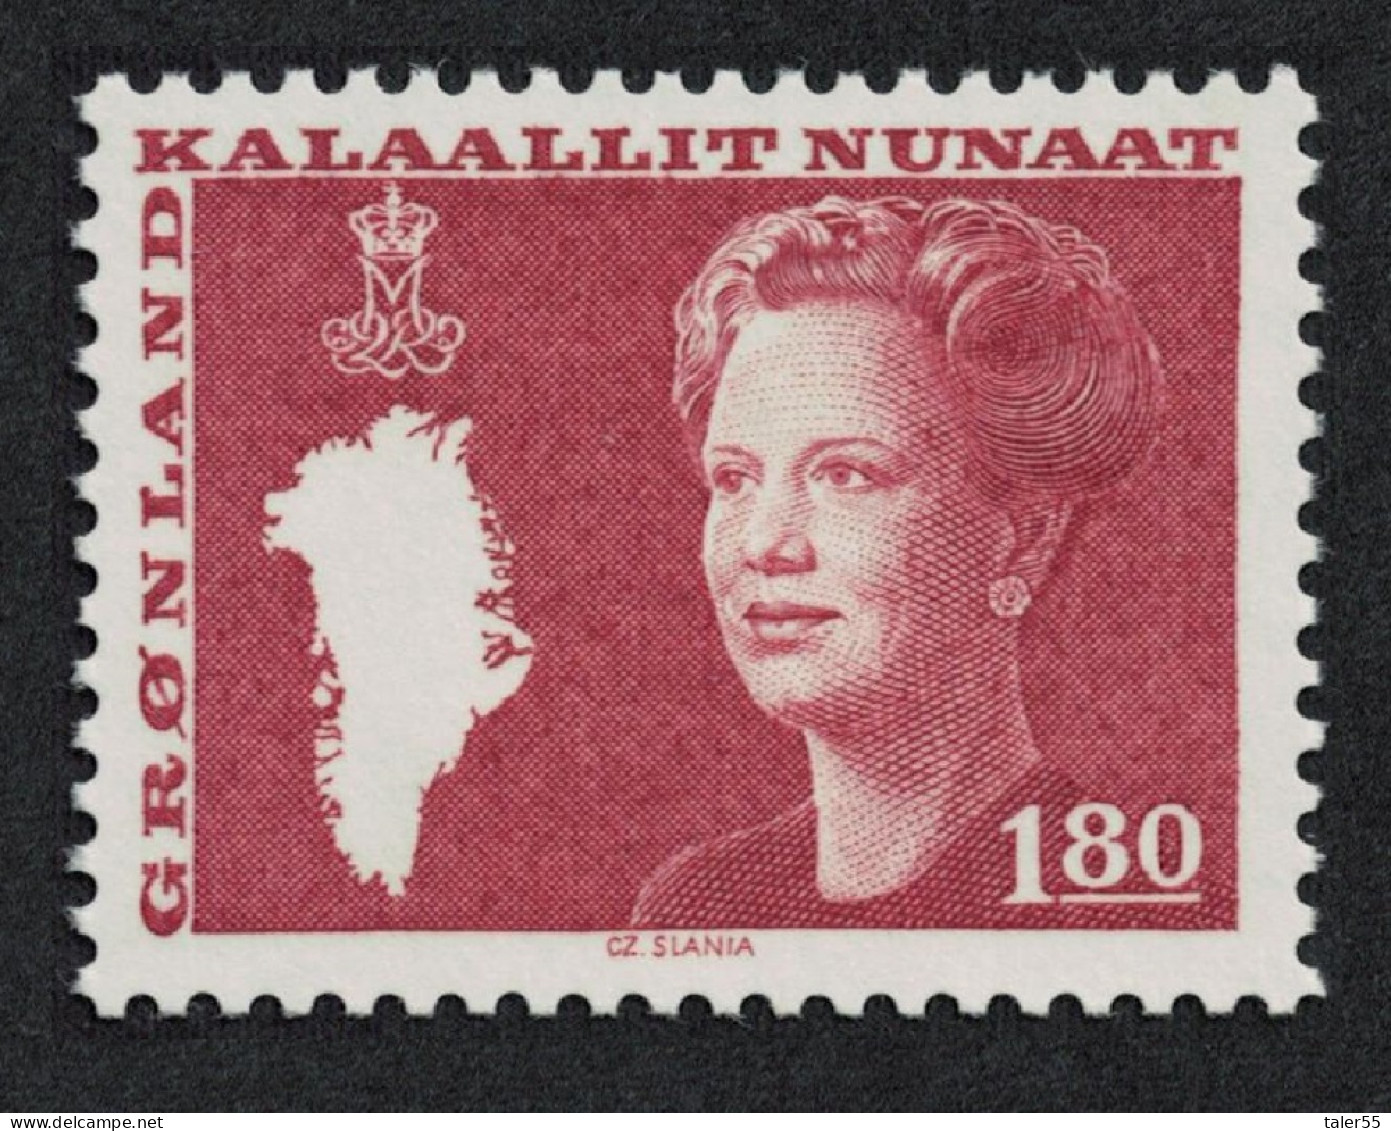 Greenland Queen Margrethe And Map Of Greenland 1k.80 1982 MNH SG#118 MI#135 - Unused Stamps